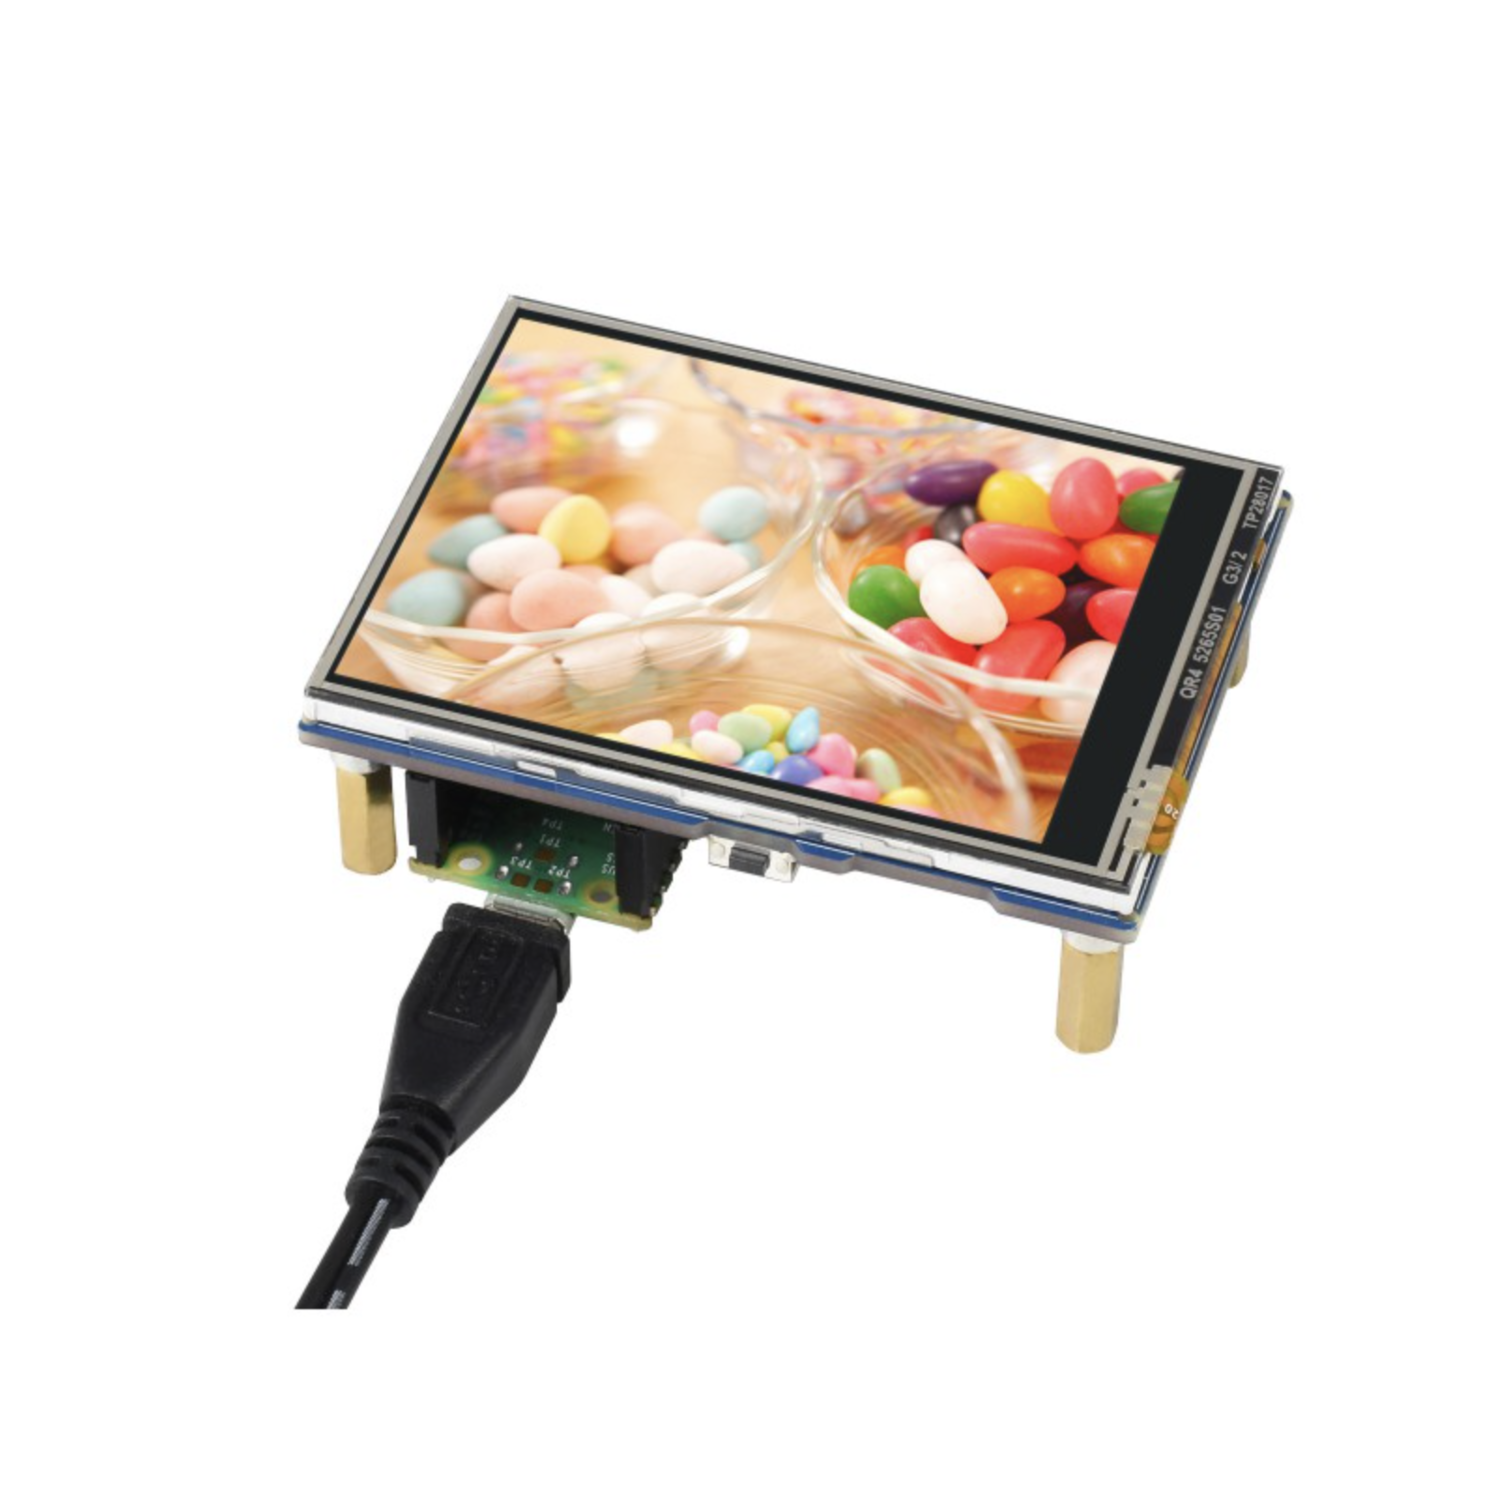 2.8inch Touch Display Module for Raspberry Pi Pico, 262K Colors, 320×240, SPI